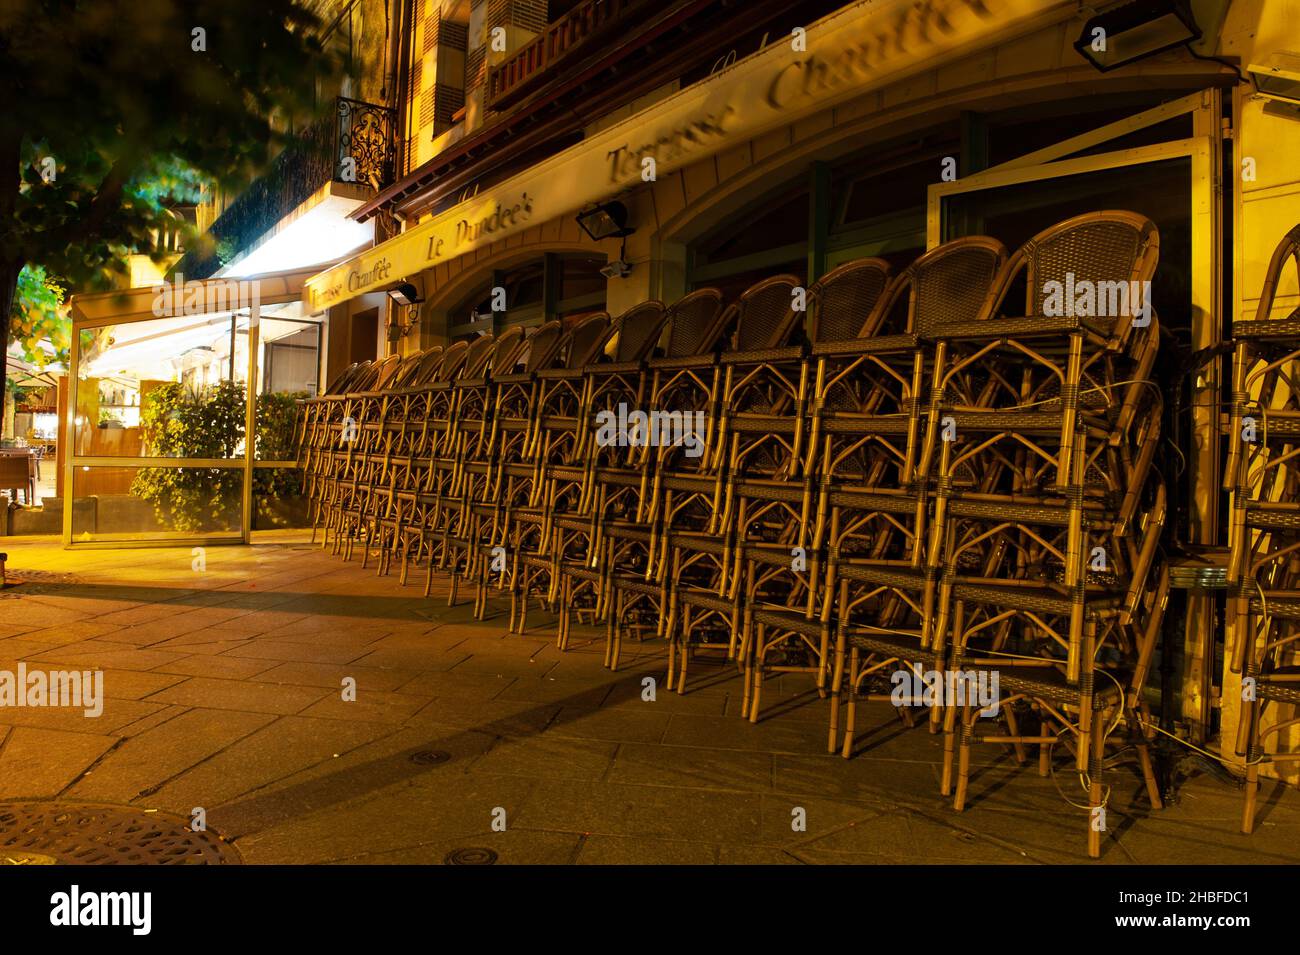 Stacked Chairs at Night Stock Photo